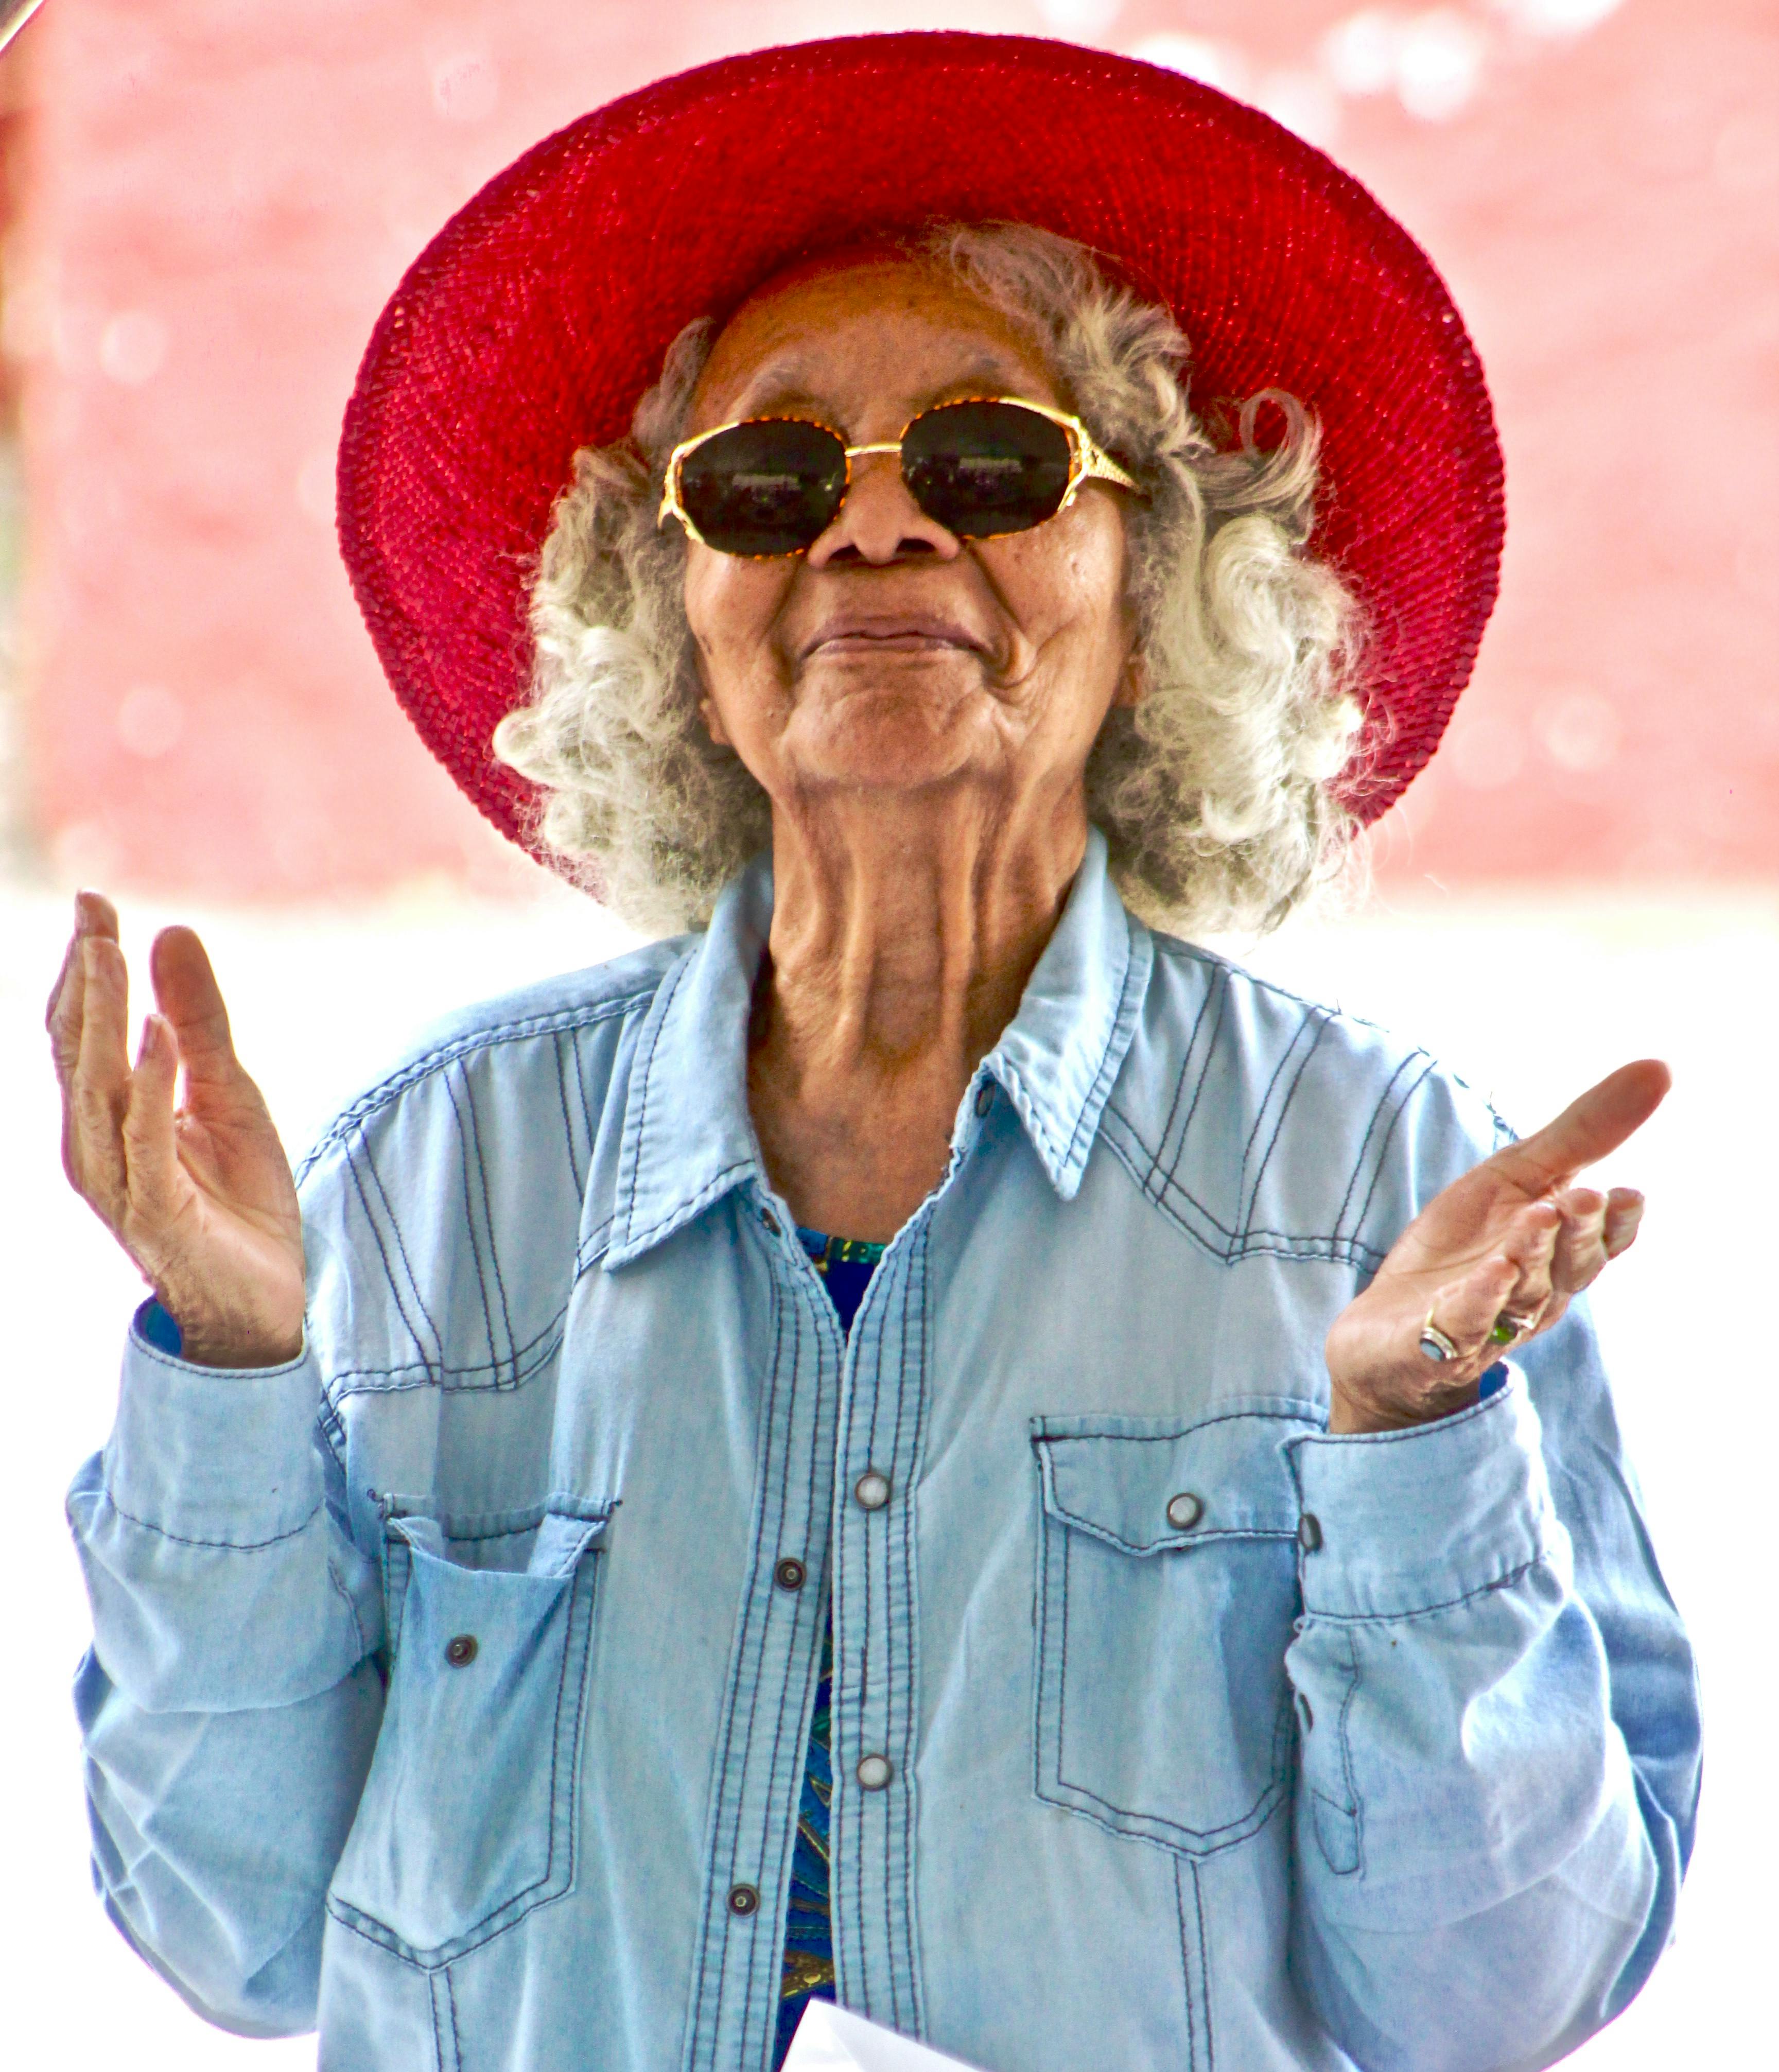 Old woman wearing red hat and sunglasses. | Photo: Pexels